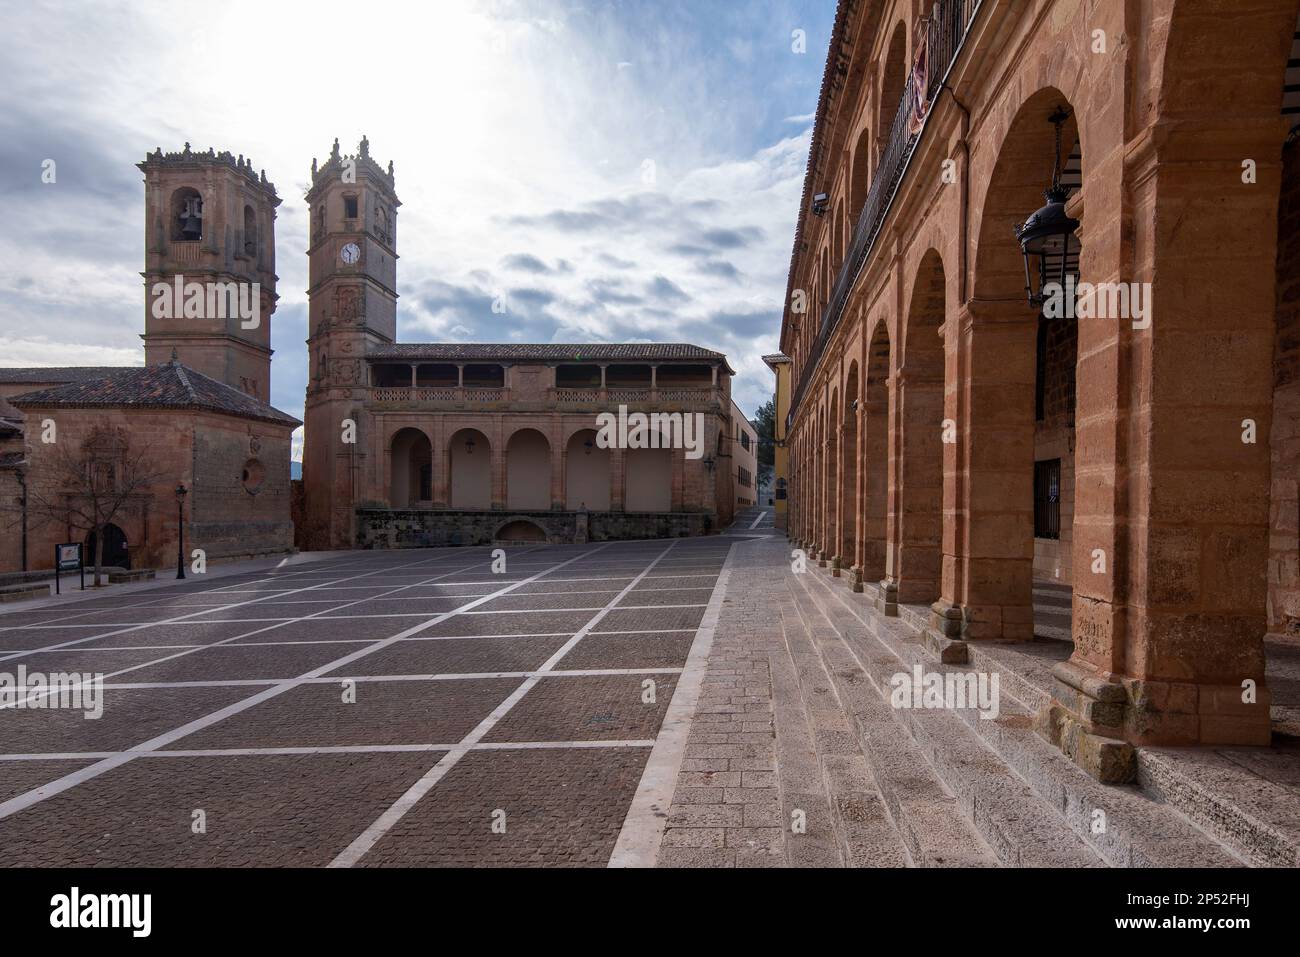 Square with a cobblestone floor, with a side with arches and in the background a church next to another building. Stock Photo